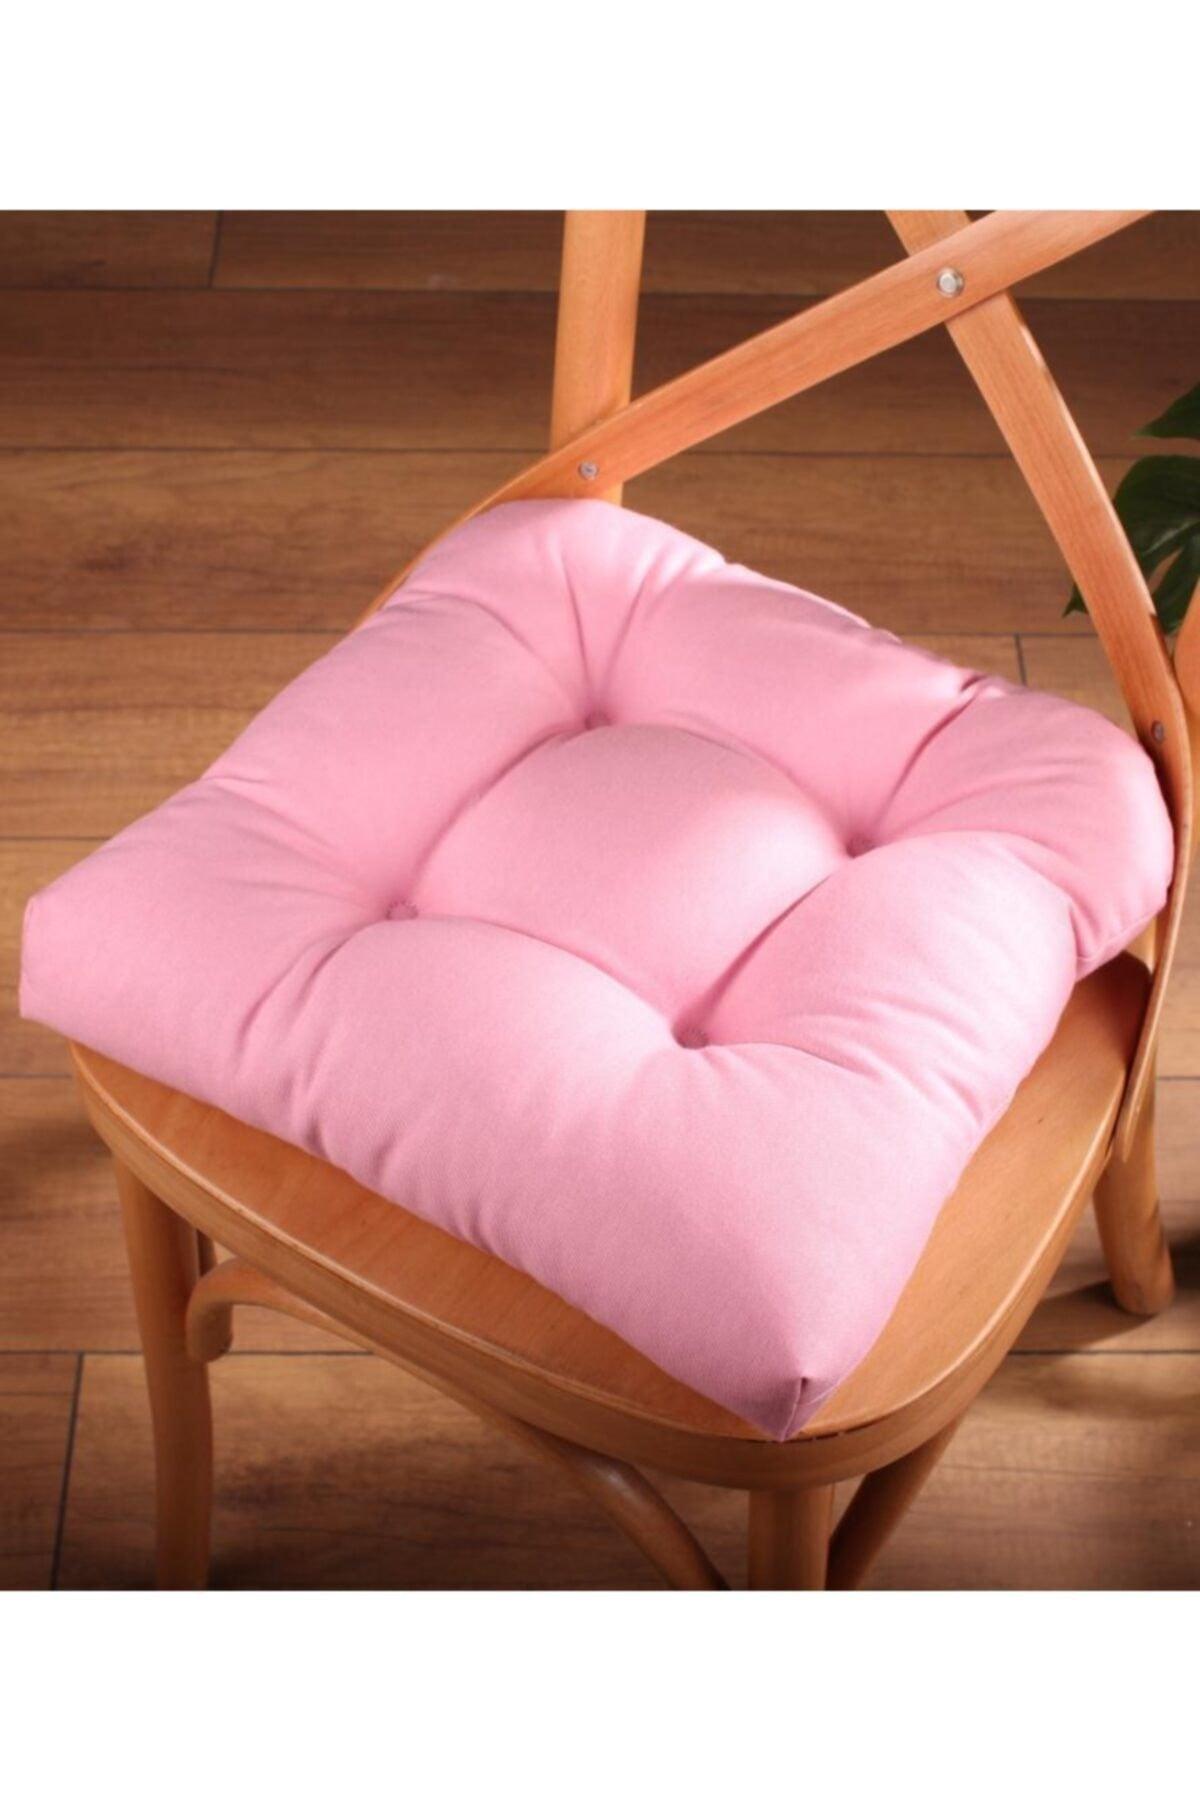 Lux Pofidik Pink Chair Cushion Special Stitched Laced 40x40cm - Swordslife